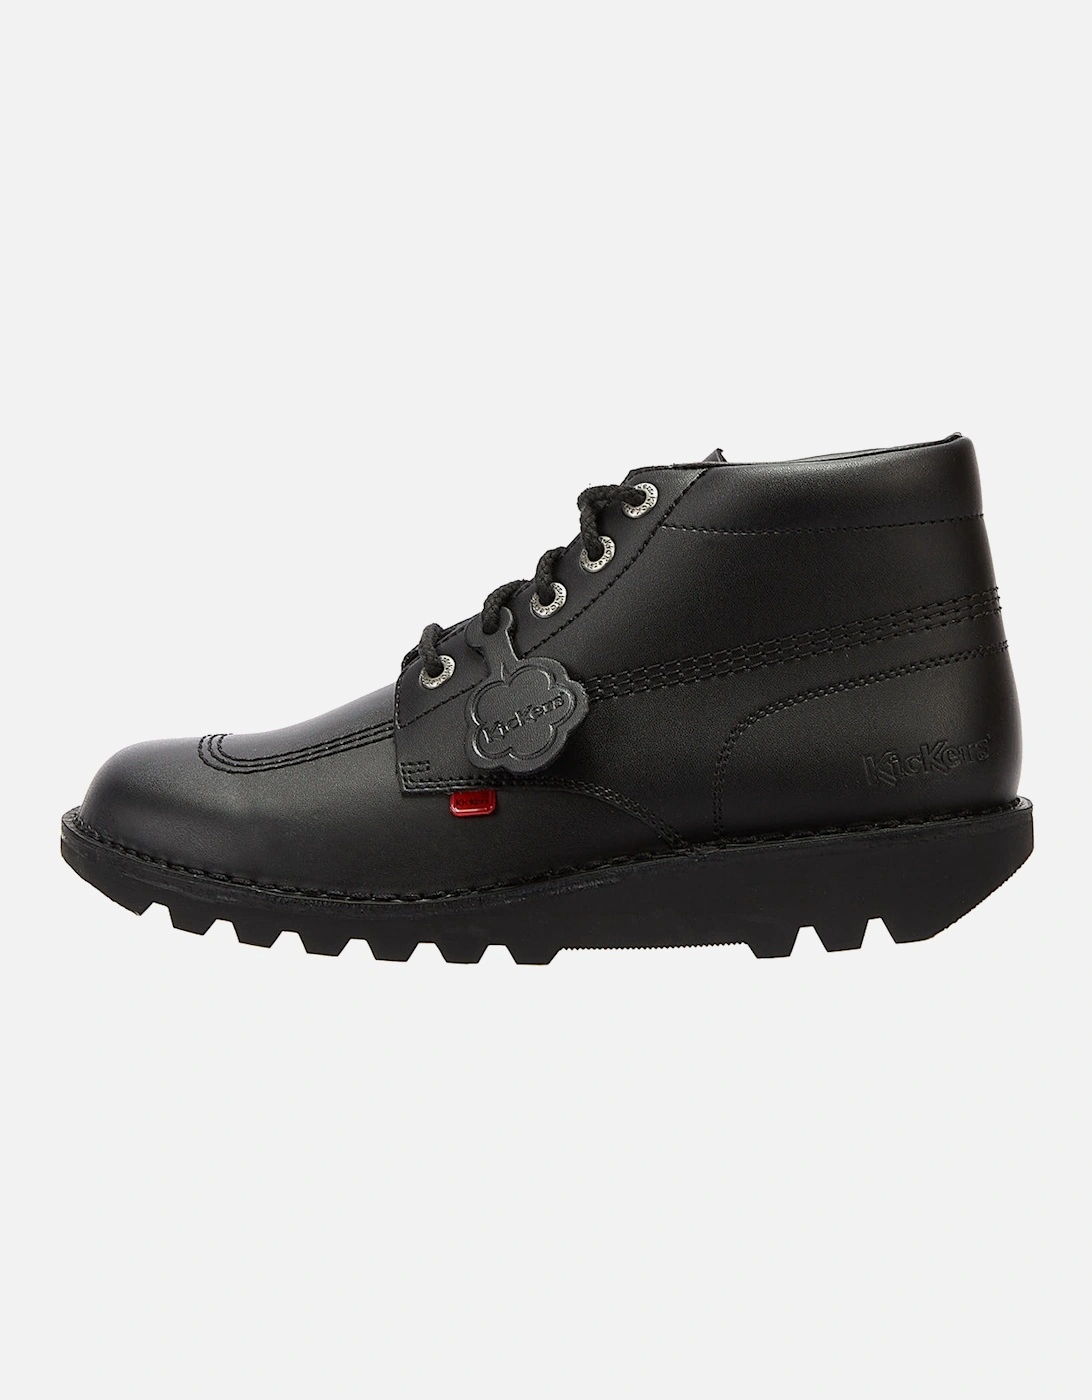 Kick Hi Youth Black Leather Ankle School Boots